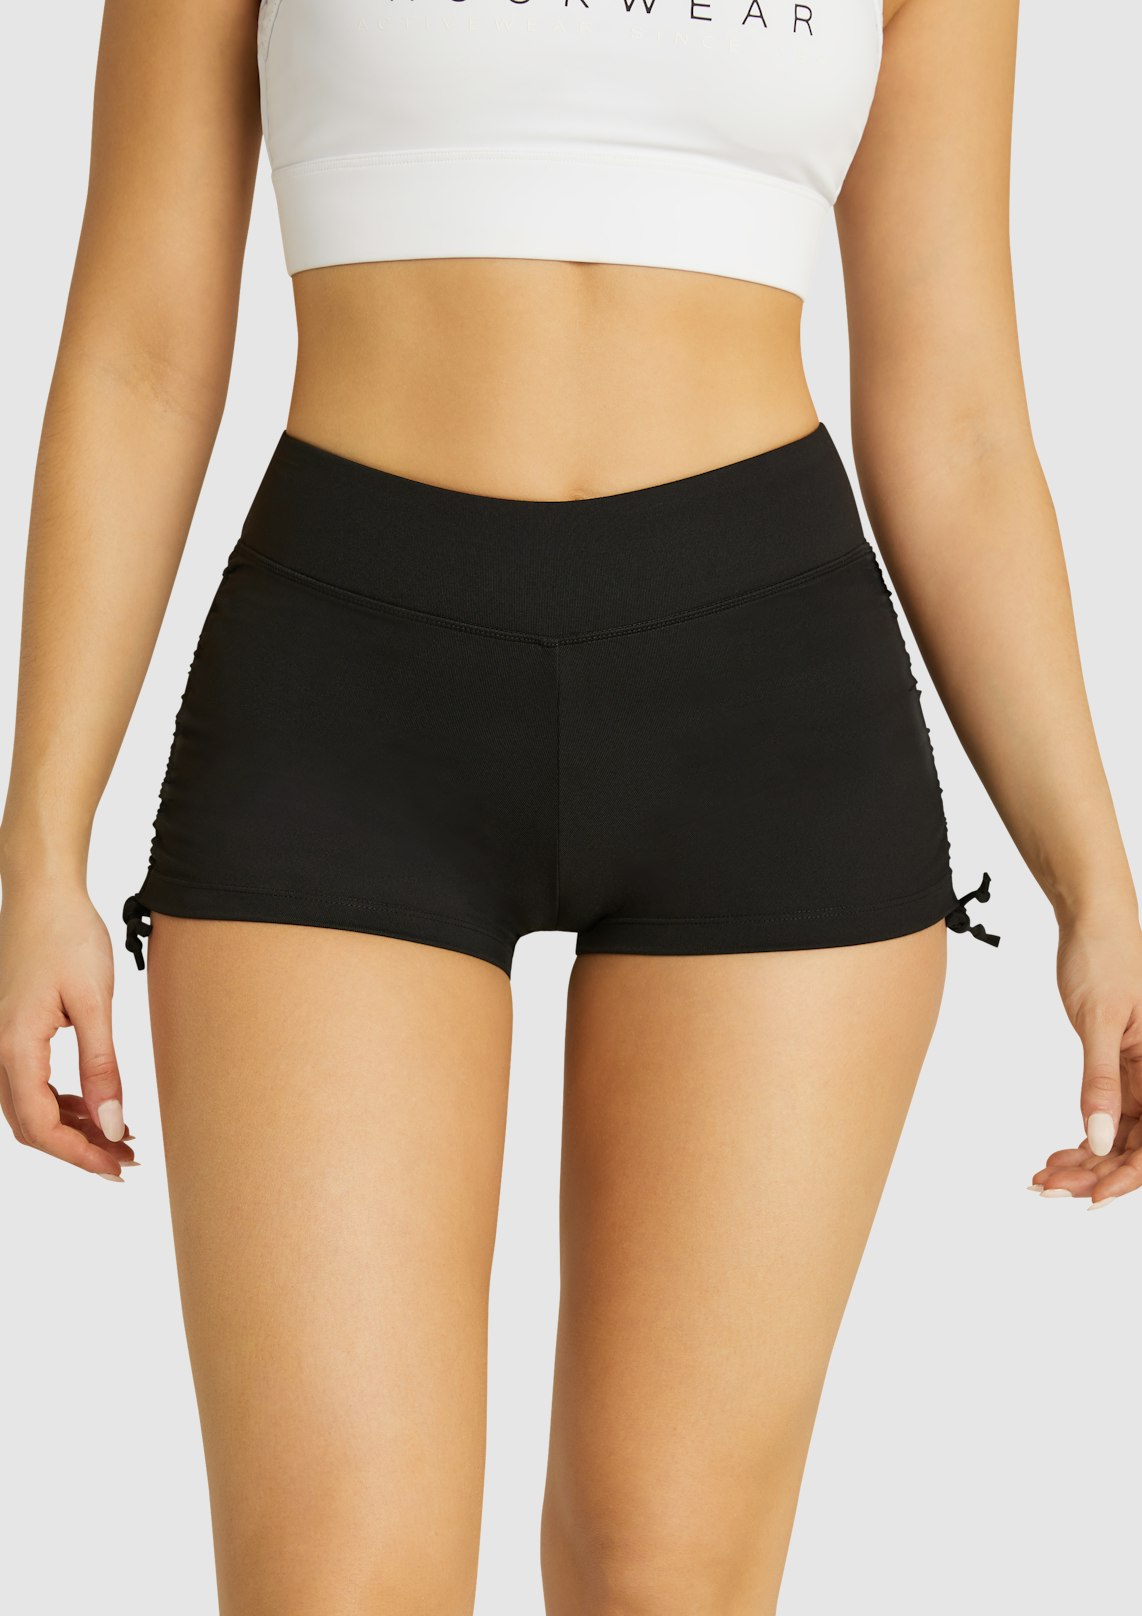 Black Rouched Booty Shorts, Women's Bottom